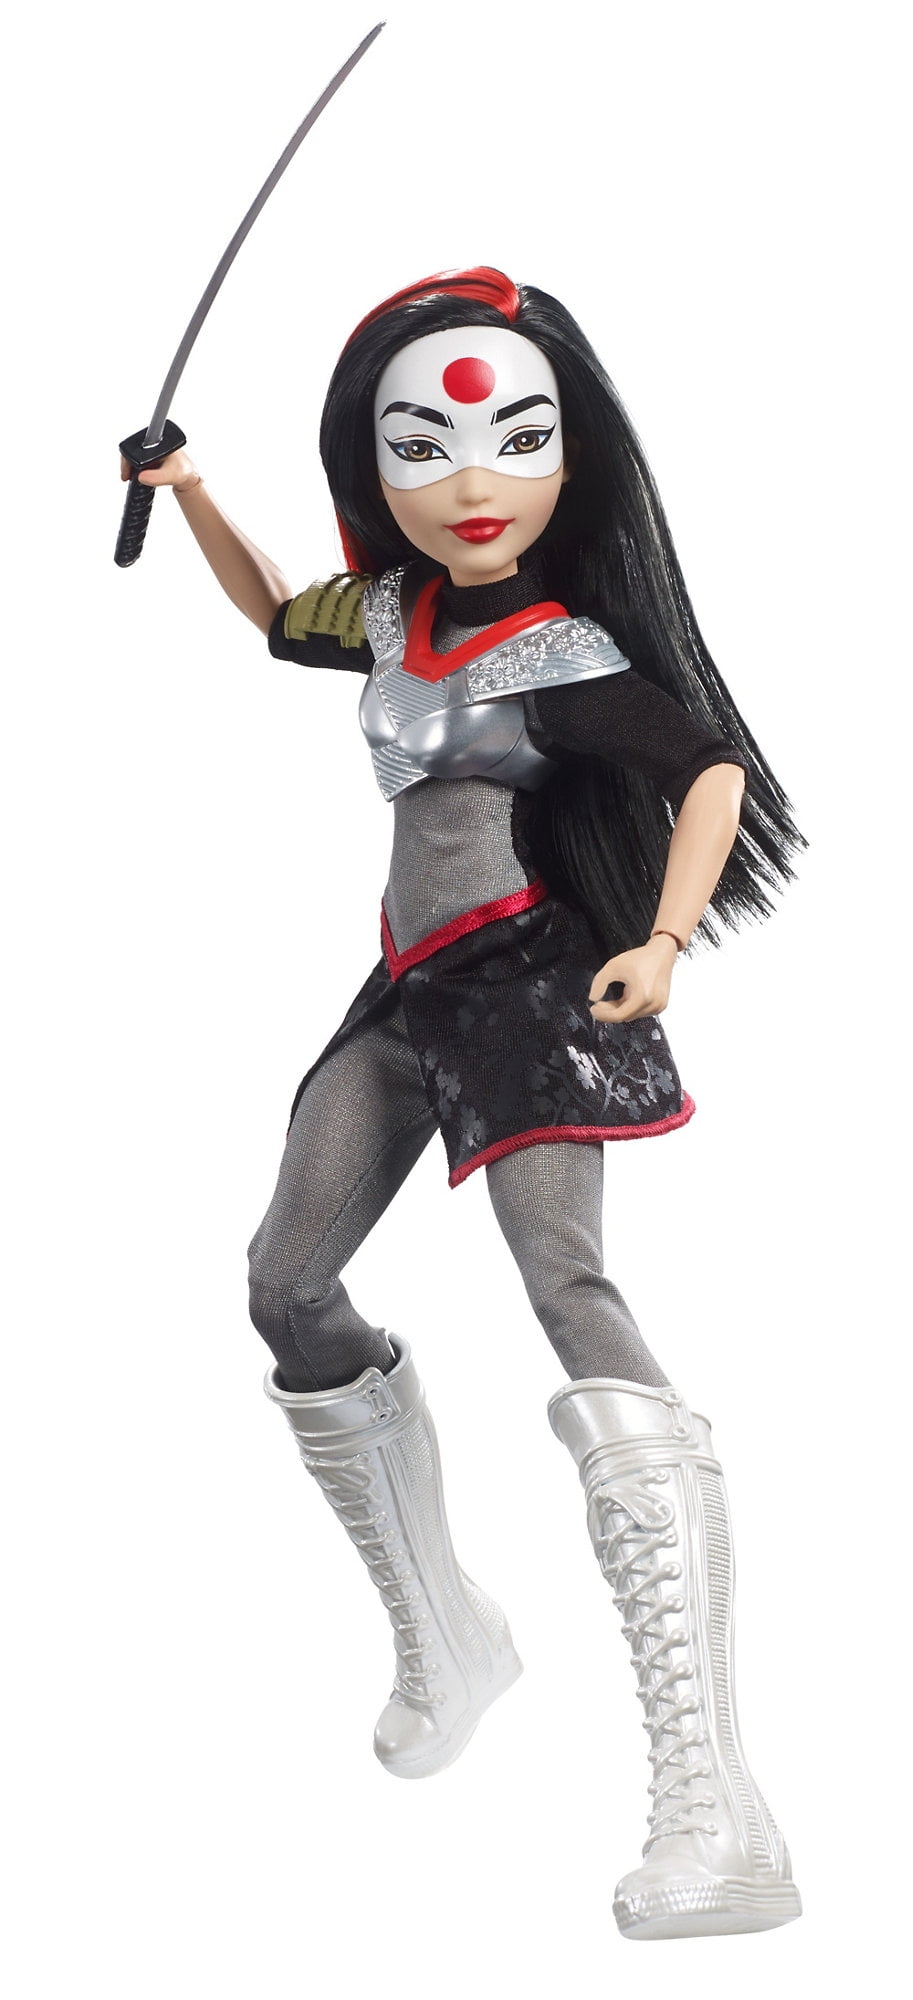 Super Hero Latest Girls Katana Action Figure Doll Adorable 12inch Comic Toy New 